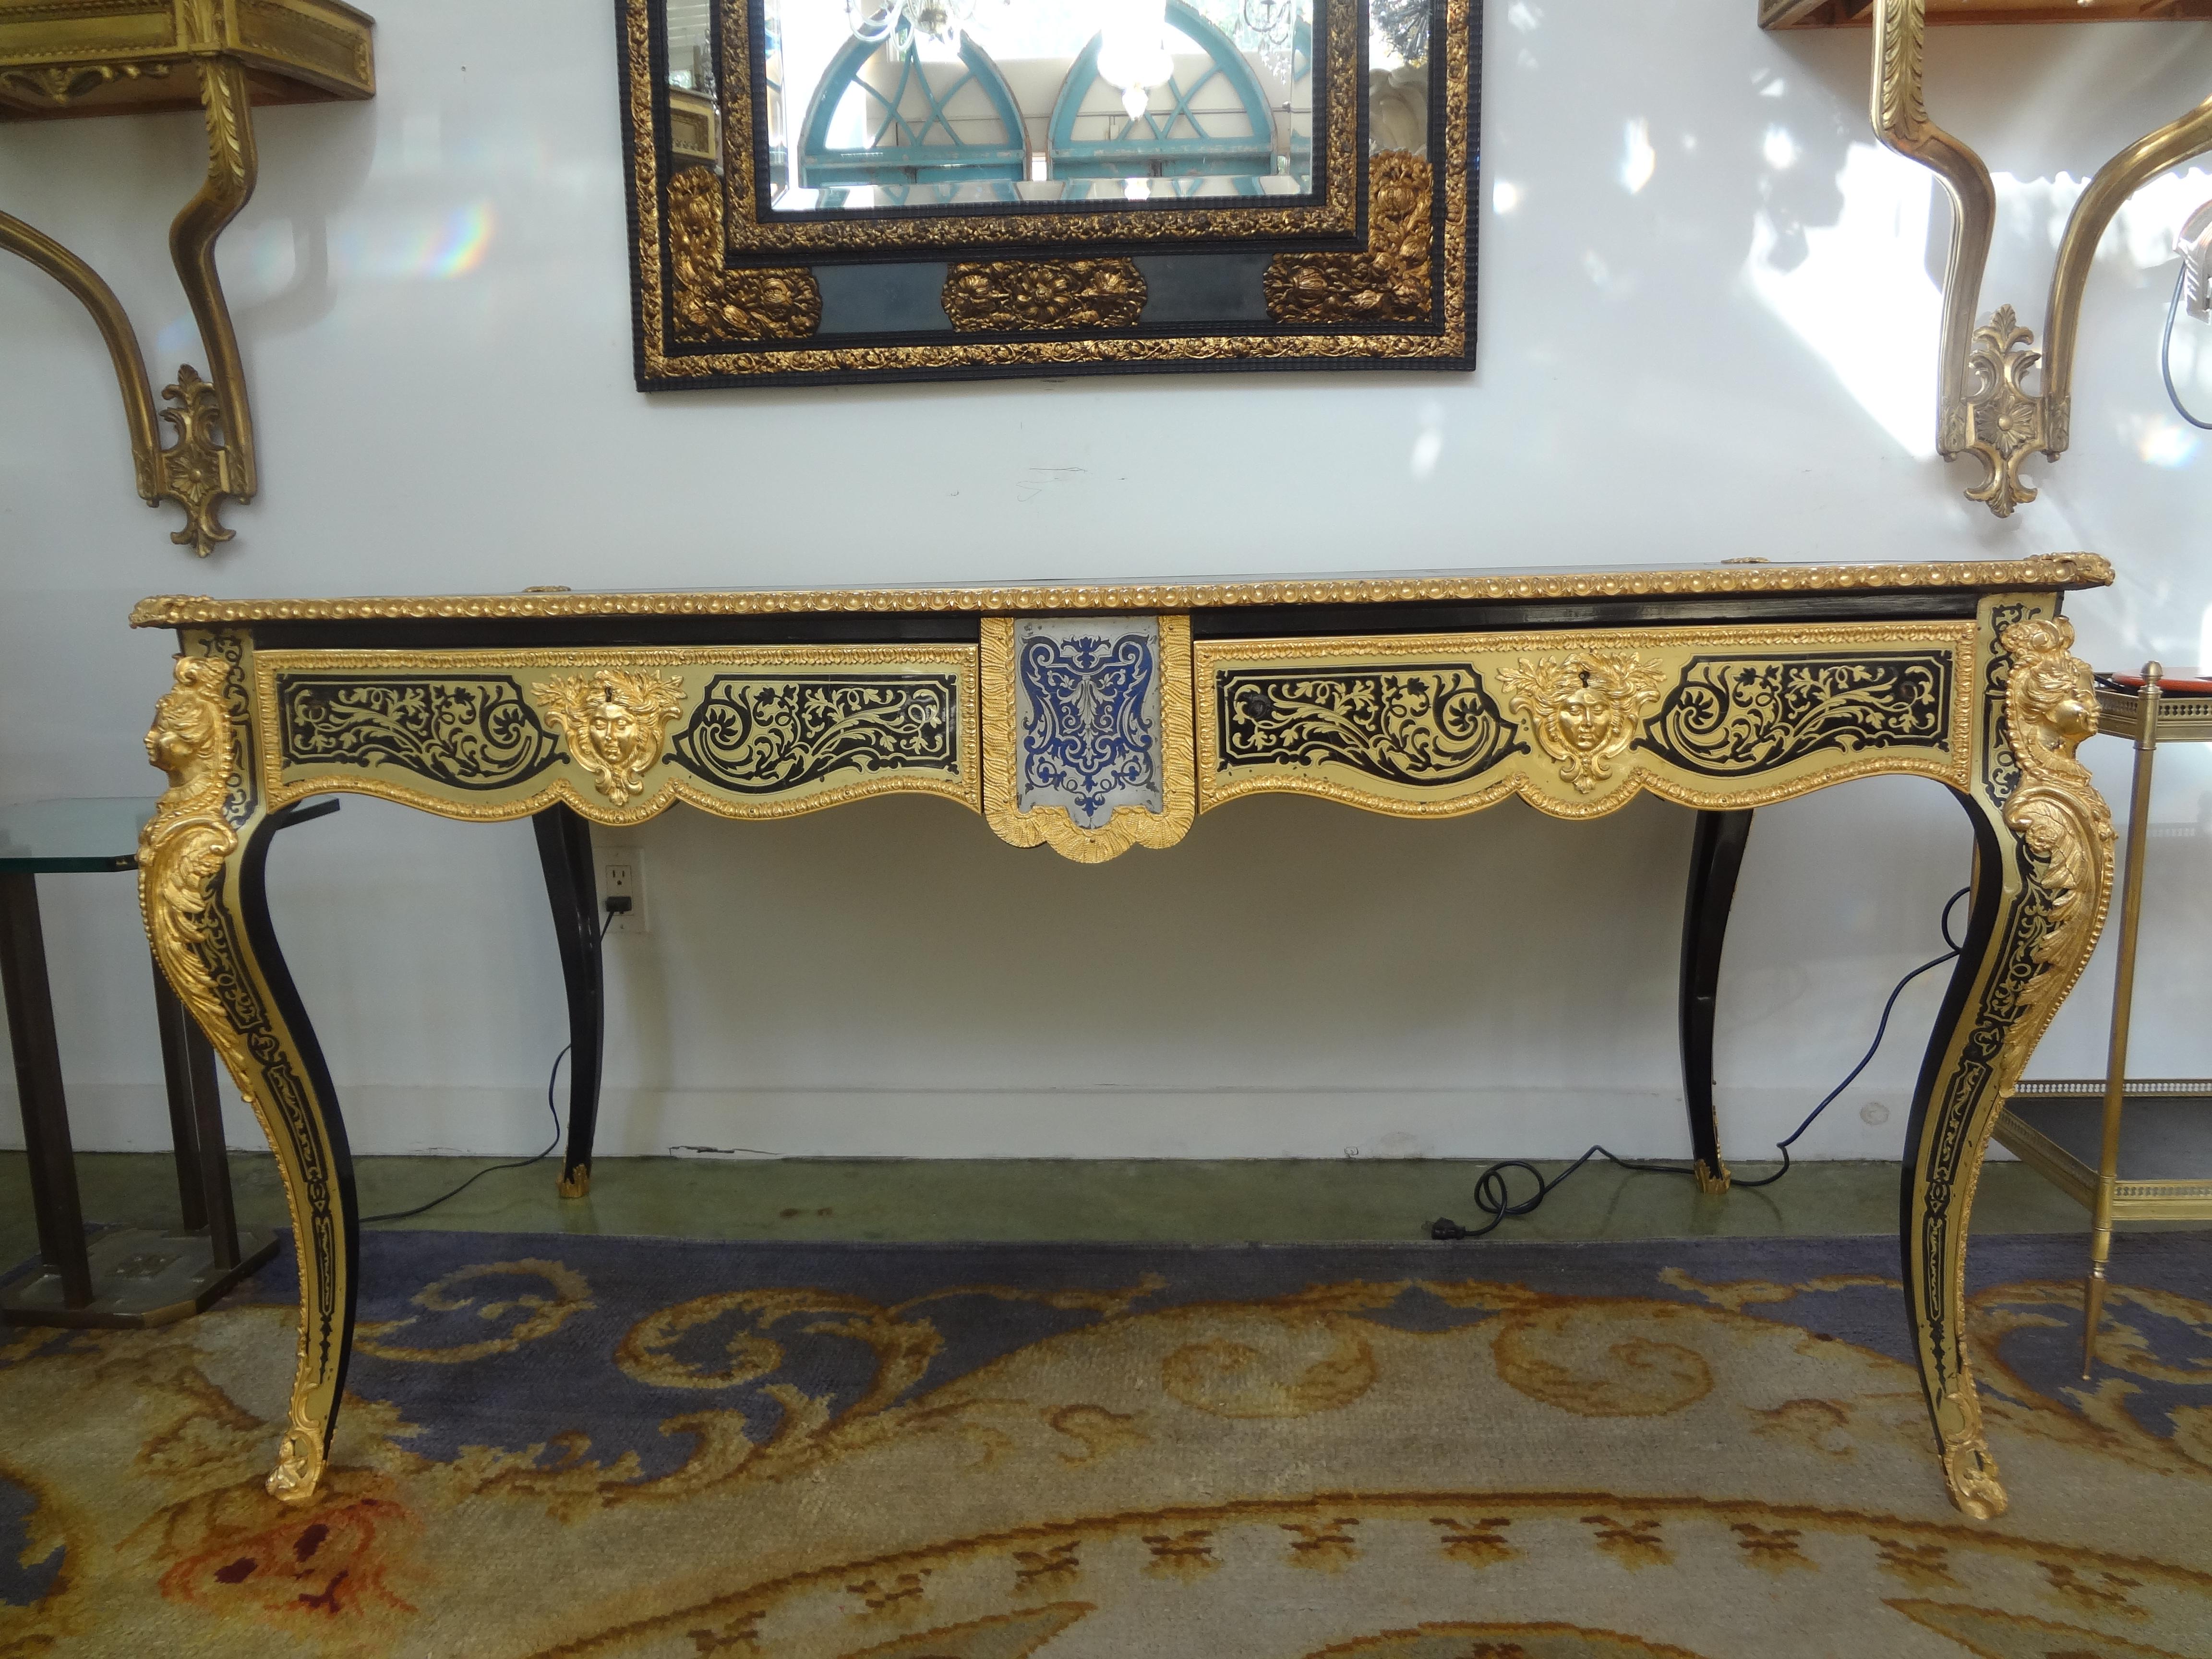 19th Century French Louis XV Style Boulle Bureau Plat.
Our outstanding antique French Louis XV style Boulle inspired bureau plat, desk or writing table was expertly crafted in the mid 19th century with beautifully detailed inlaid brass and fine